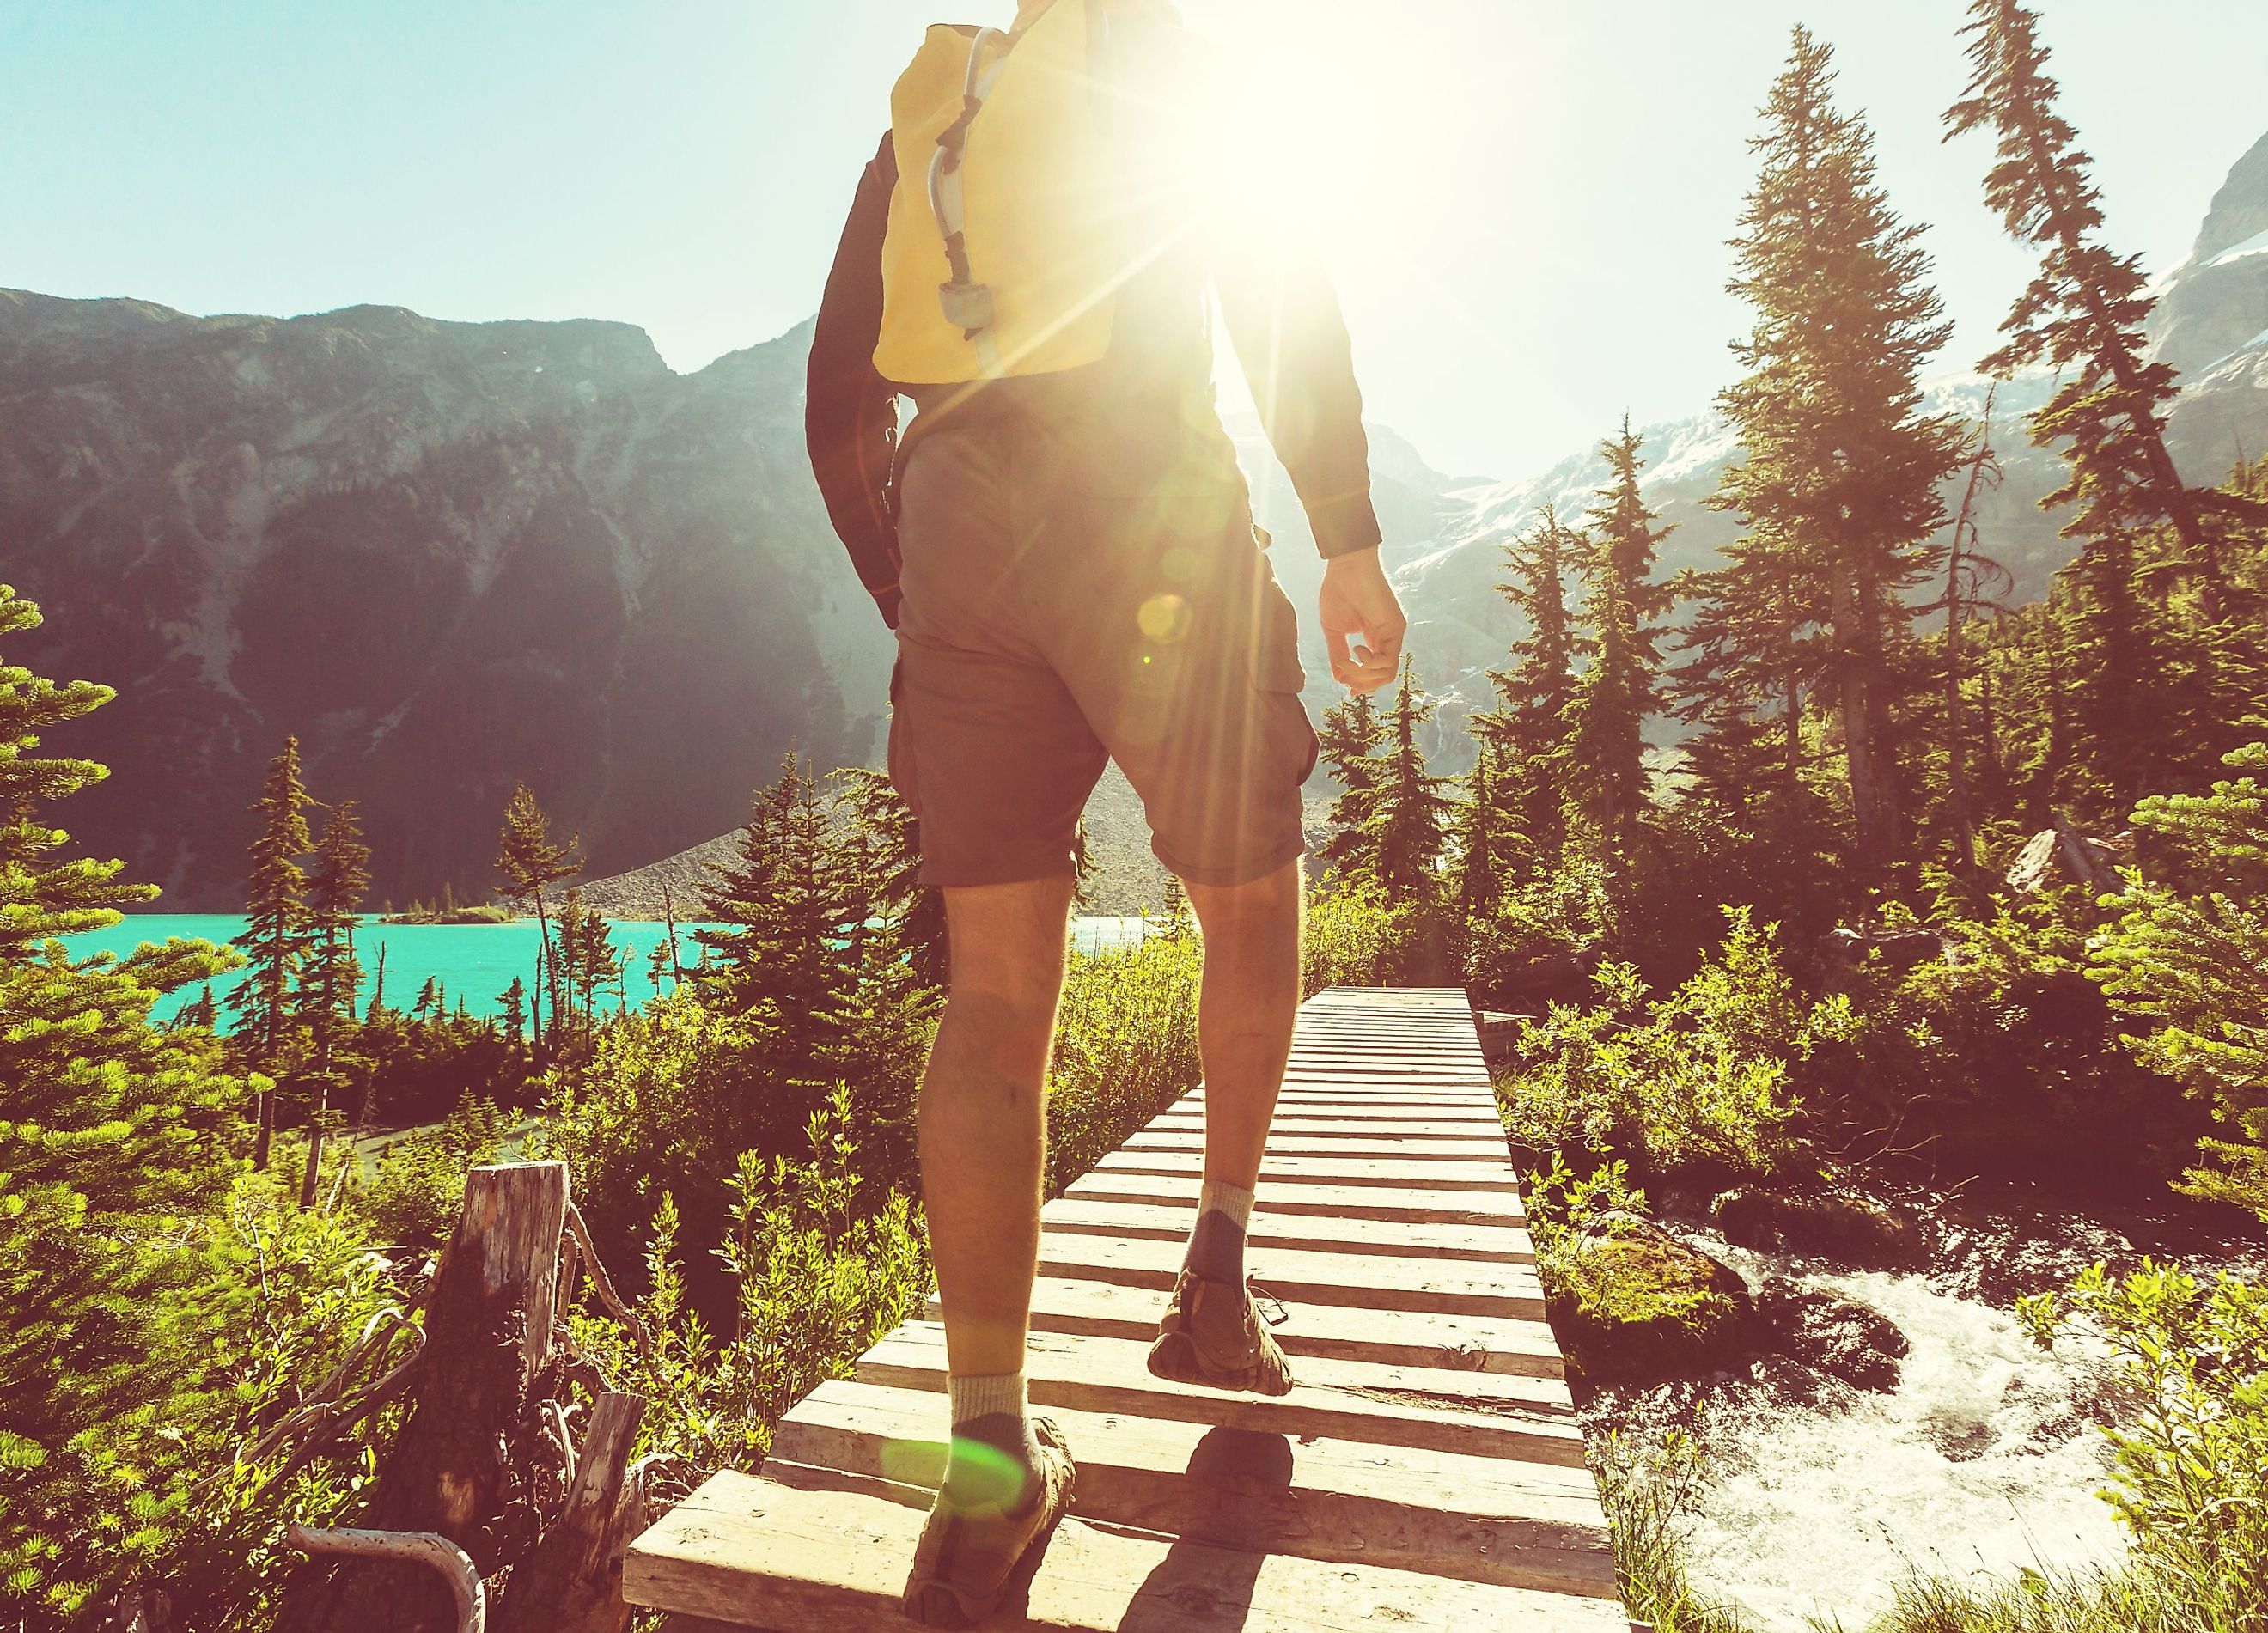 Hiking man in the mountains. Image credit Galyna Andrushko via shutterstock